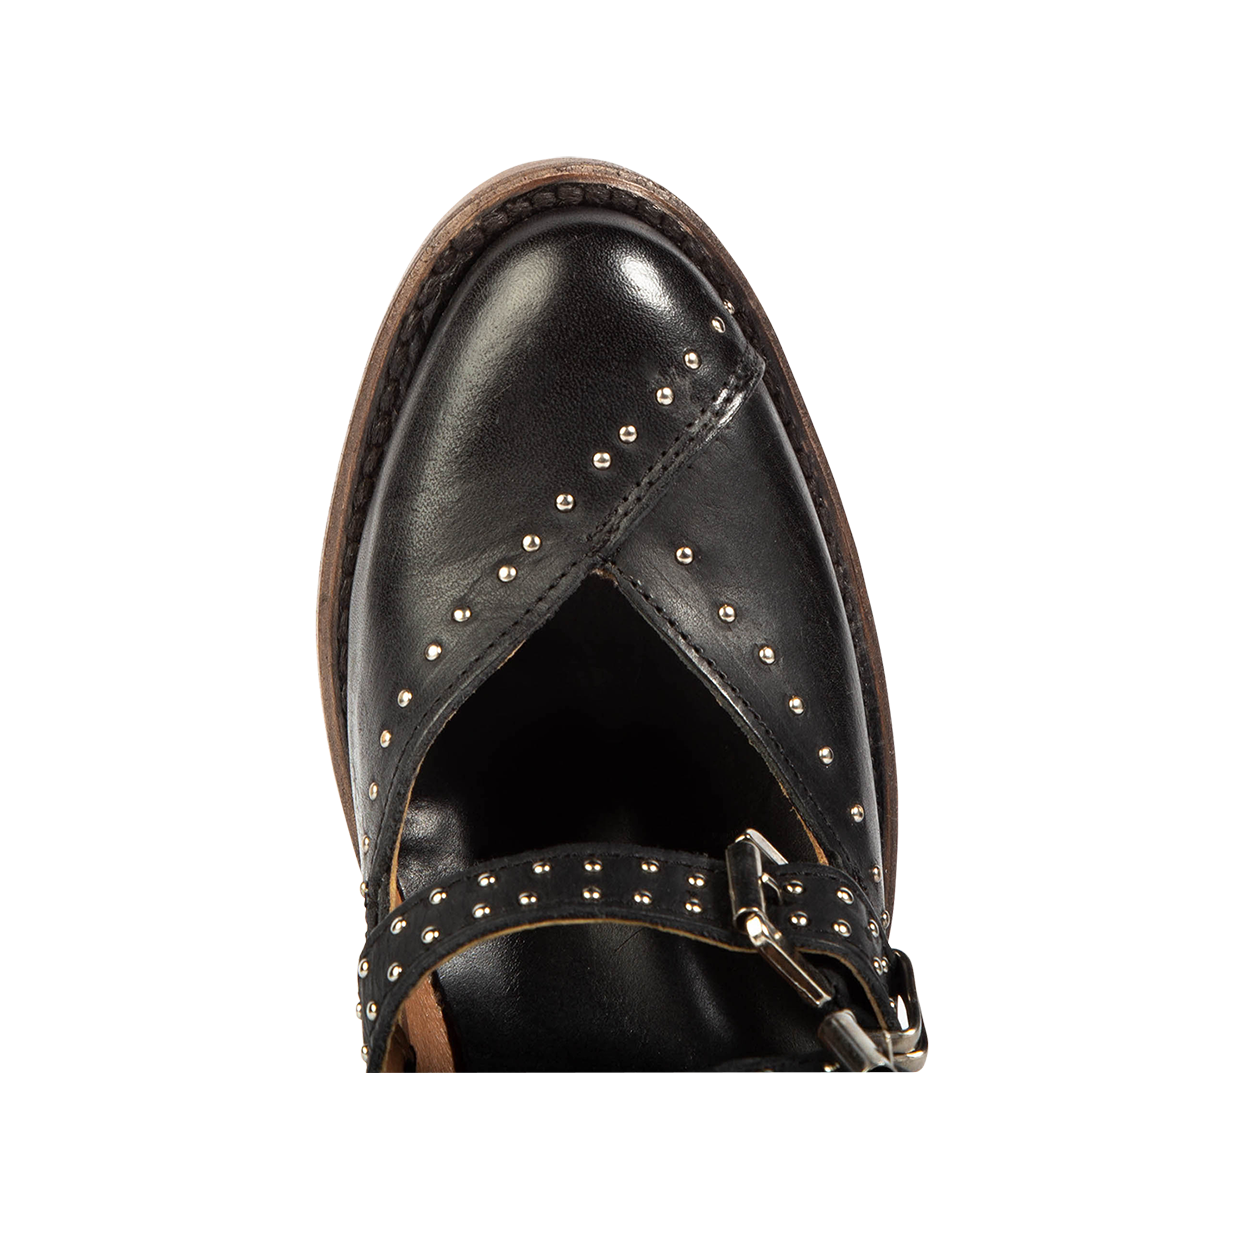 Top view showing almond toe and silver stud detailing on FREEBIRD women's Felicity black bootie